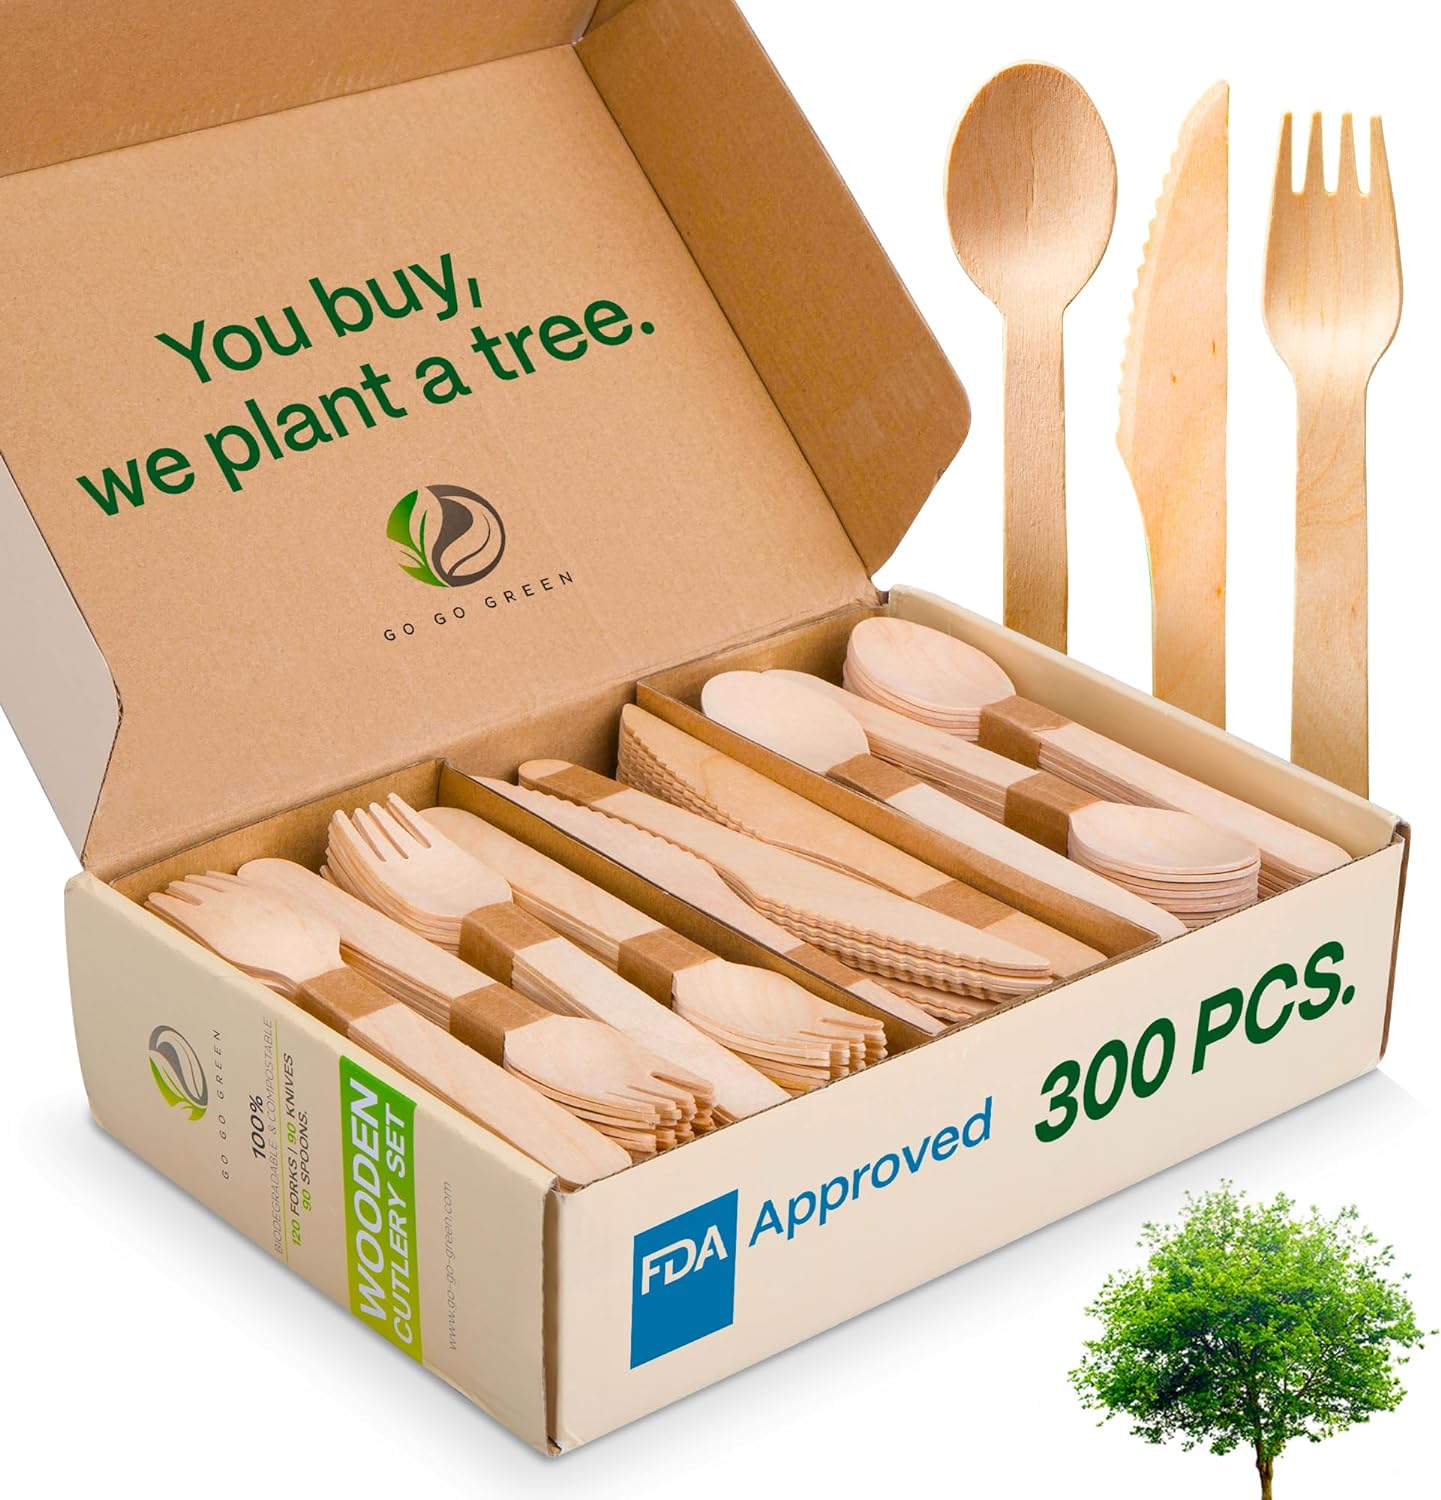 100% Compostable Cutlery Set - 300 Pieces Wooden Utensils, 120 Forks, 90 Knives, 90 Spoons - Disposable Eco Friendly